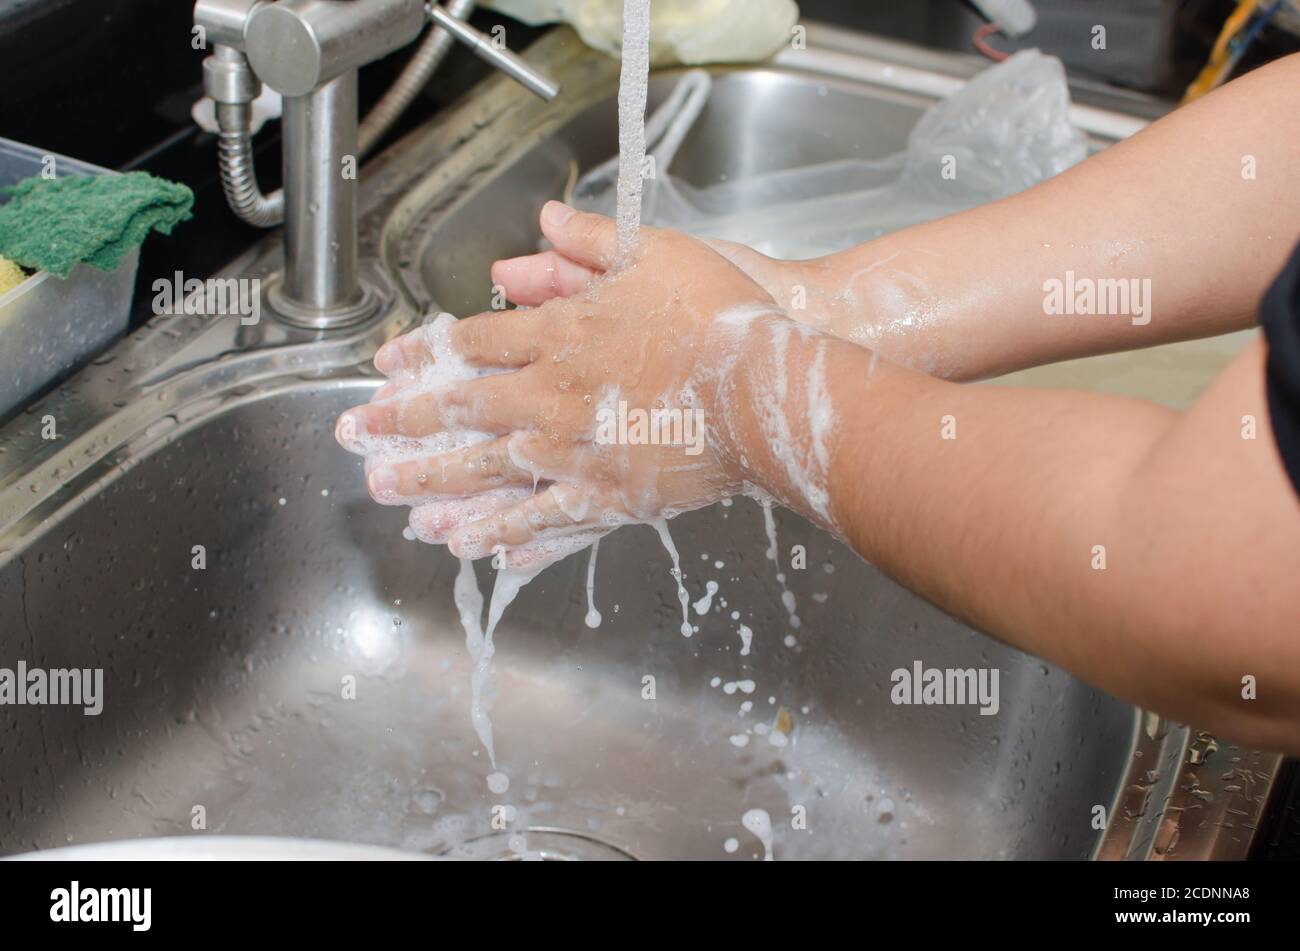 Wash hands with soap Stock Photo